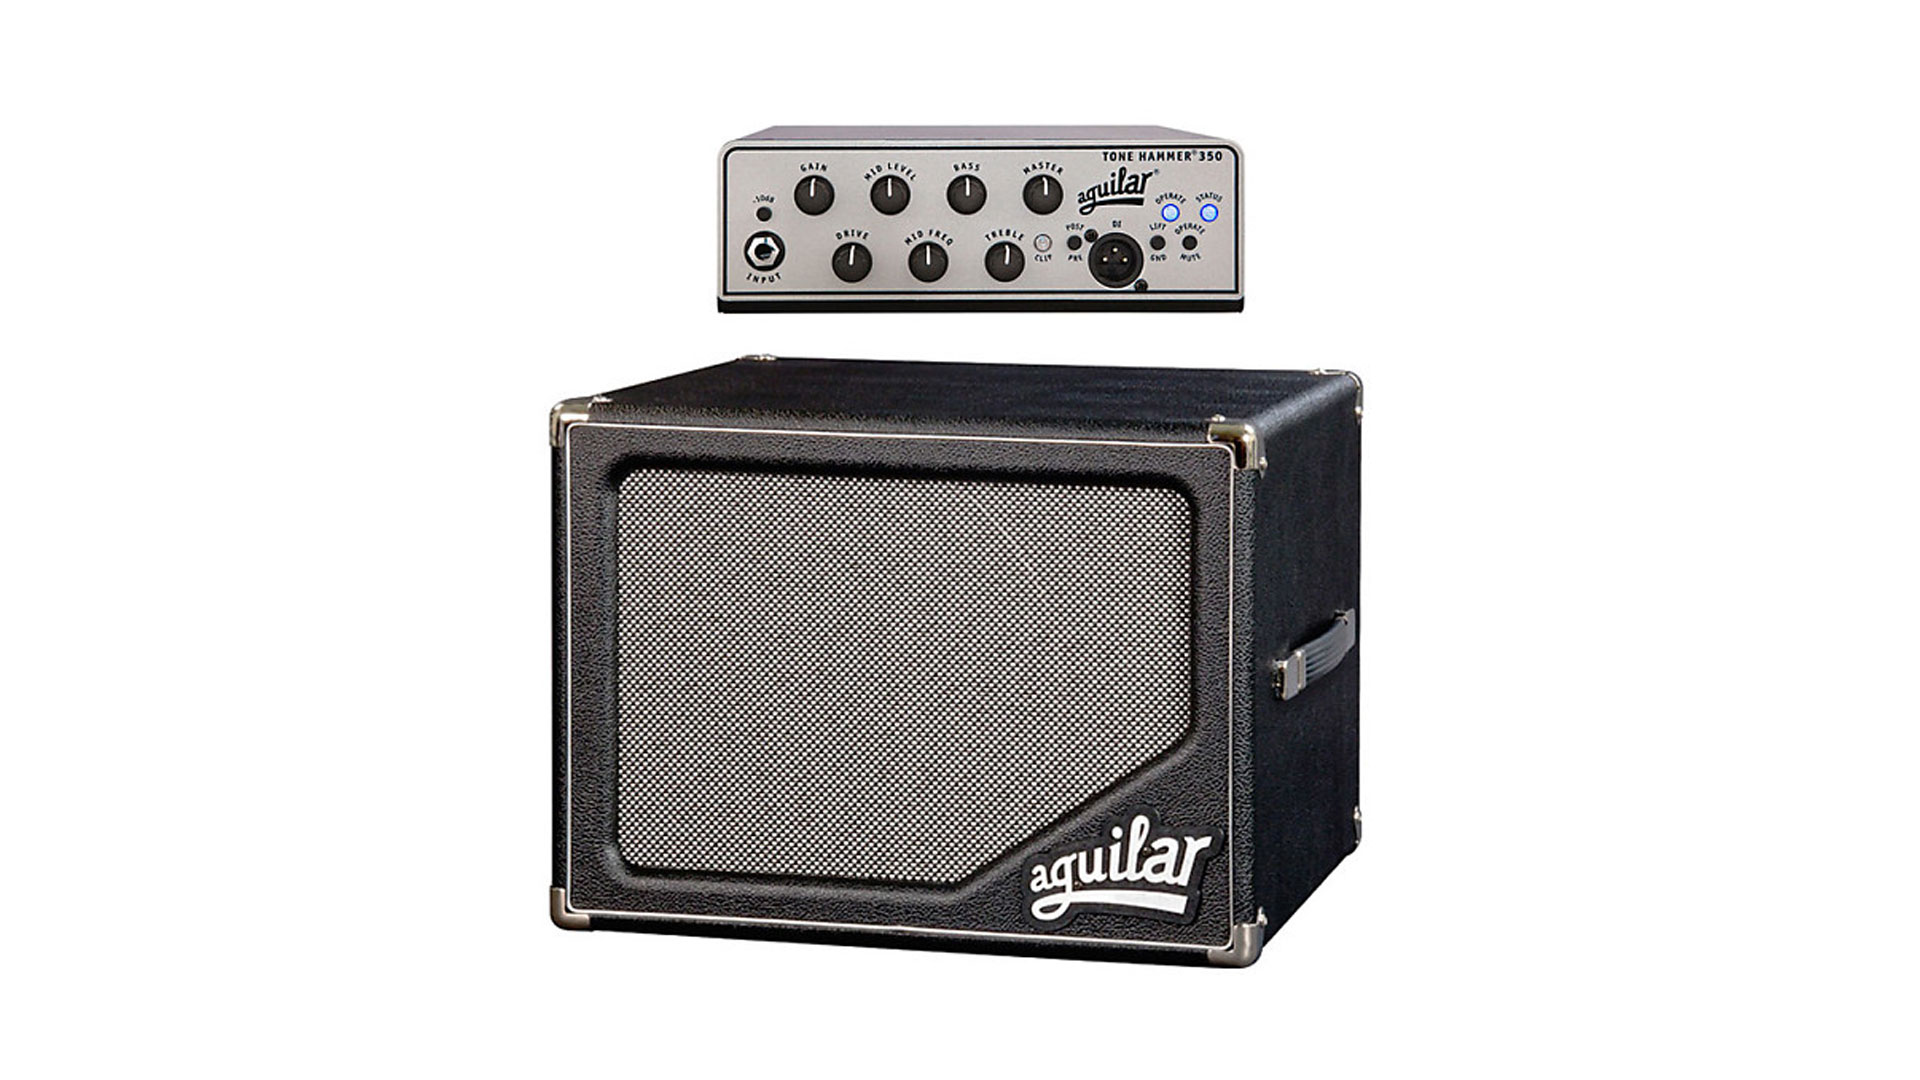 The Aguilar Tone Hammer 350 amp and SL112 cabinet.